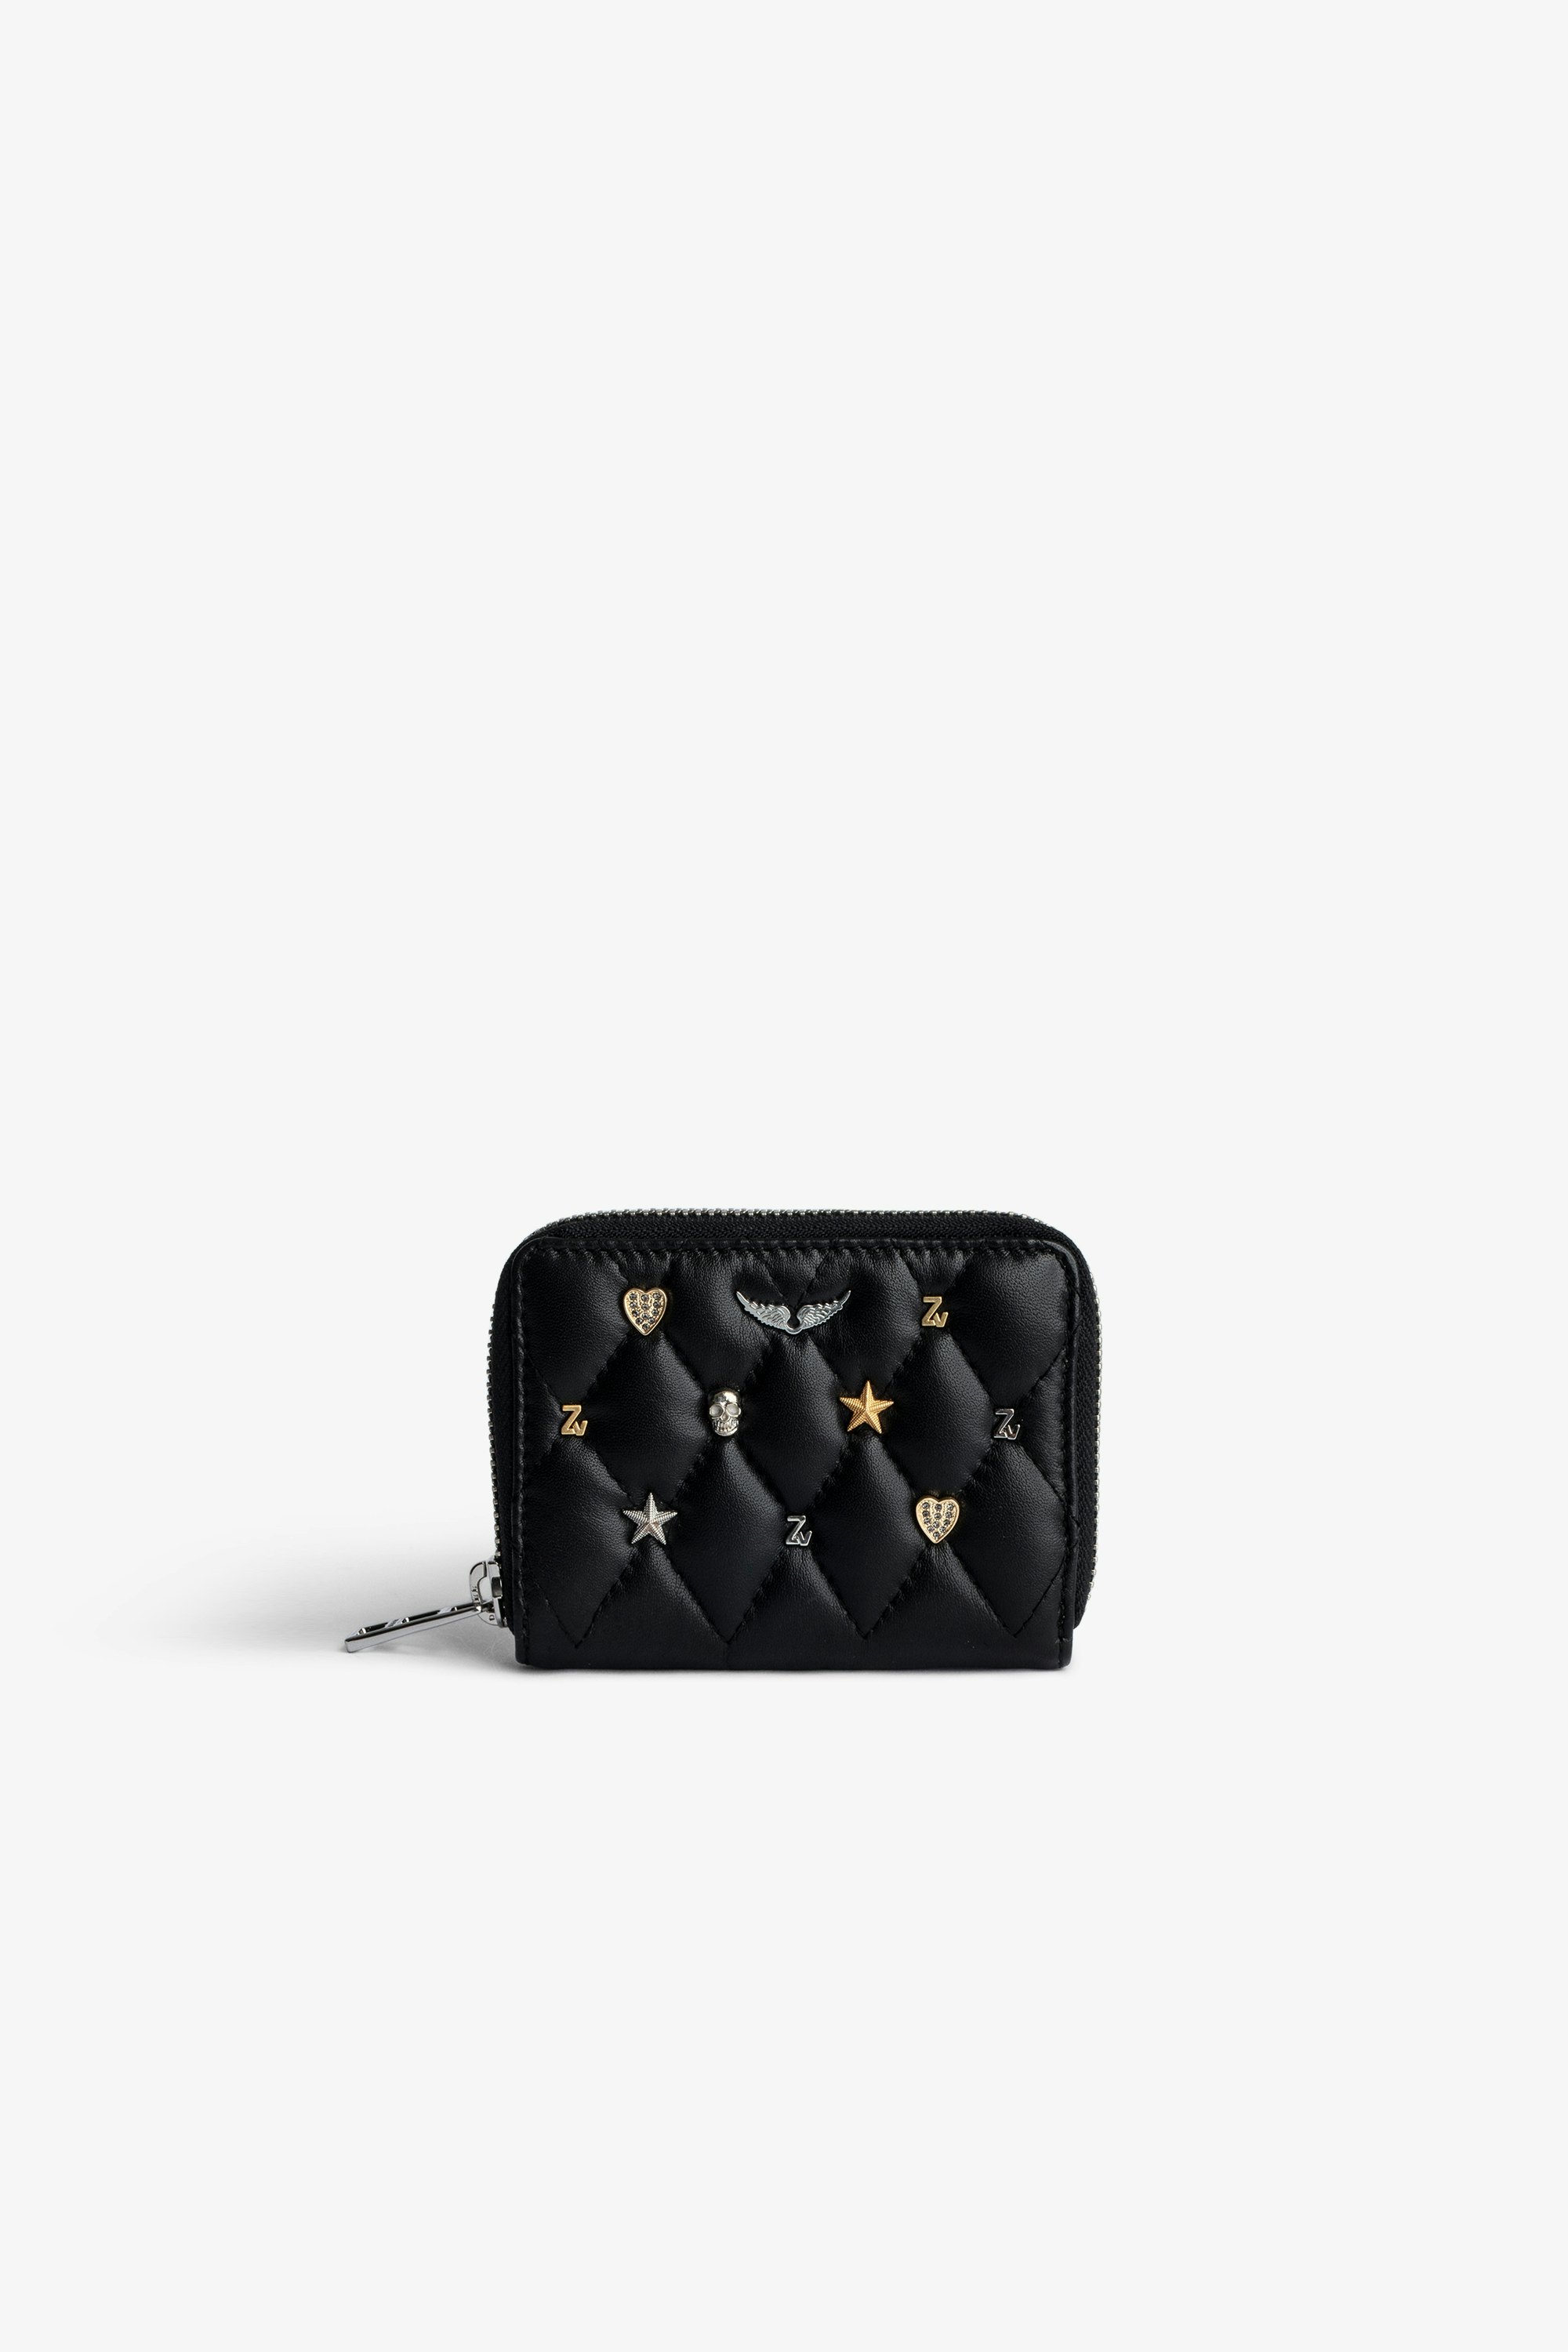 Mini ZV Coin 財布 Women’s black quilted leather coin purse with silver- and gold-tone charms